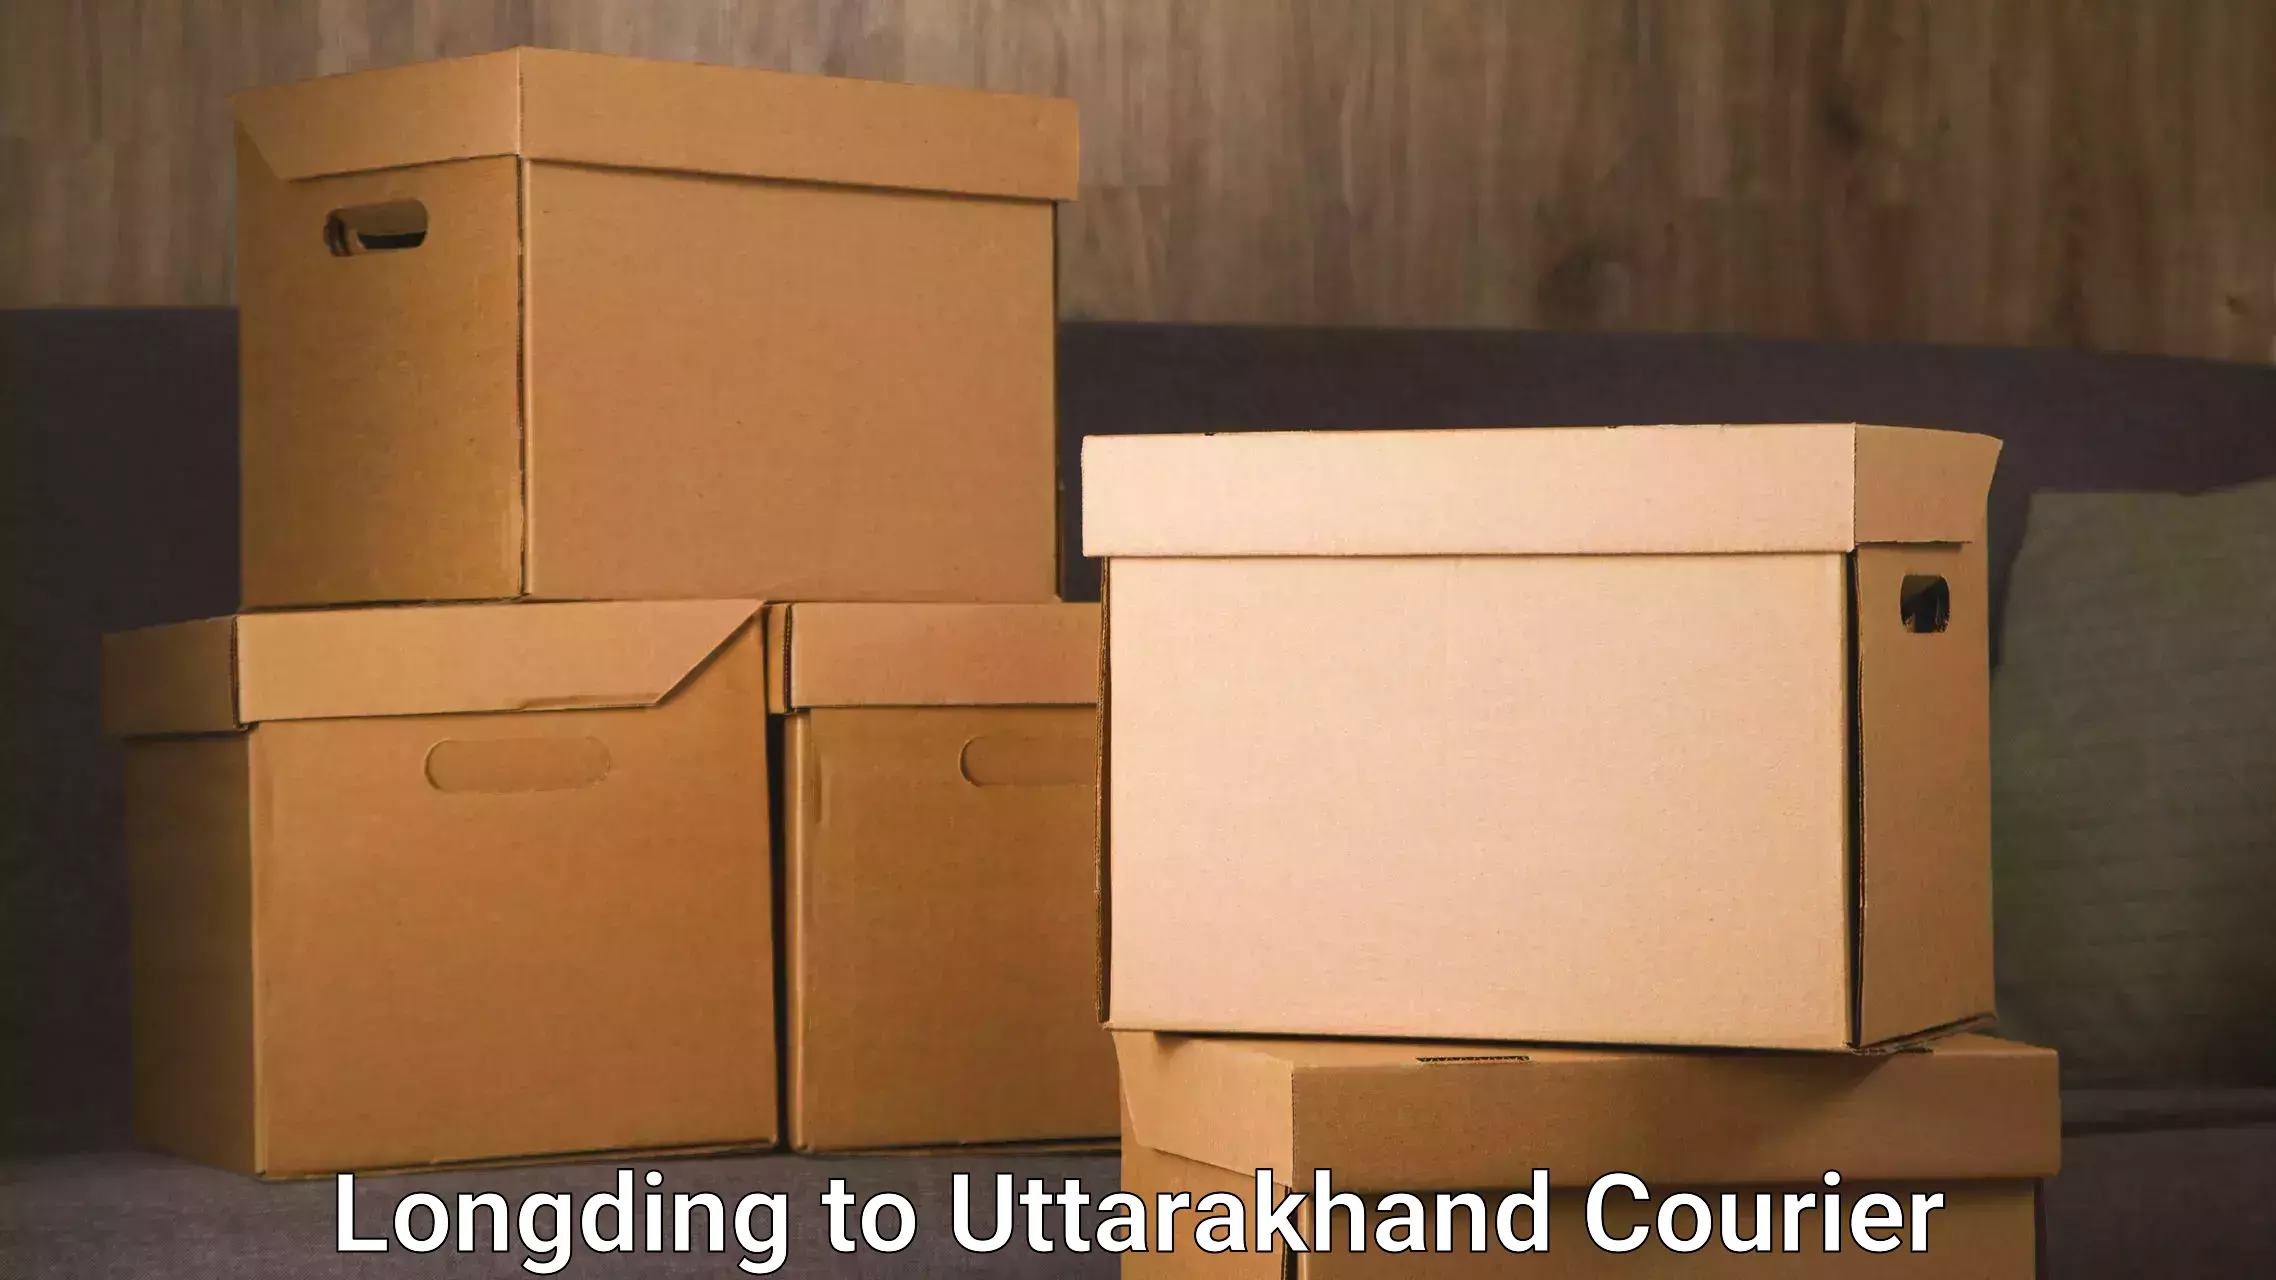 Courier service efficiency in Longding to Dwarahat